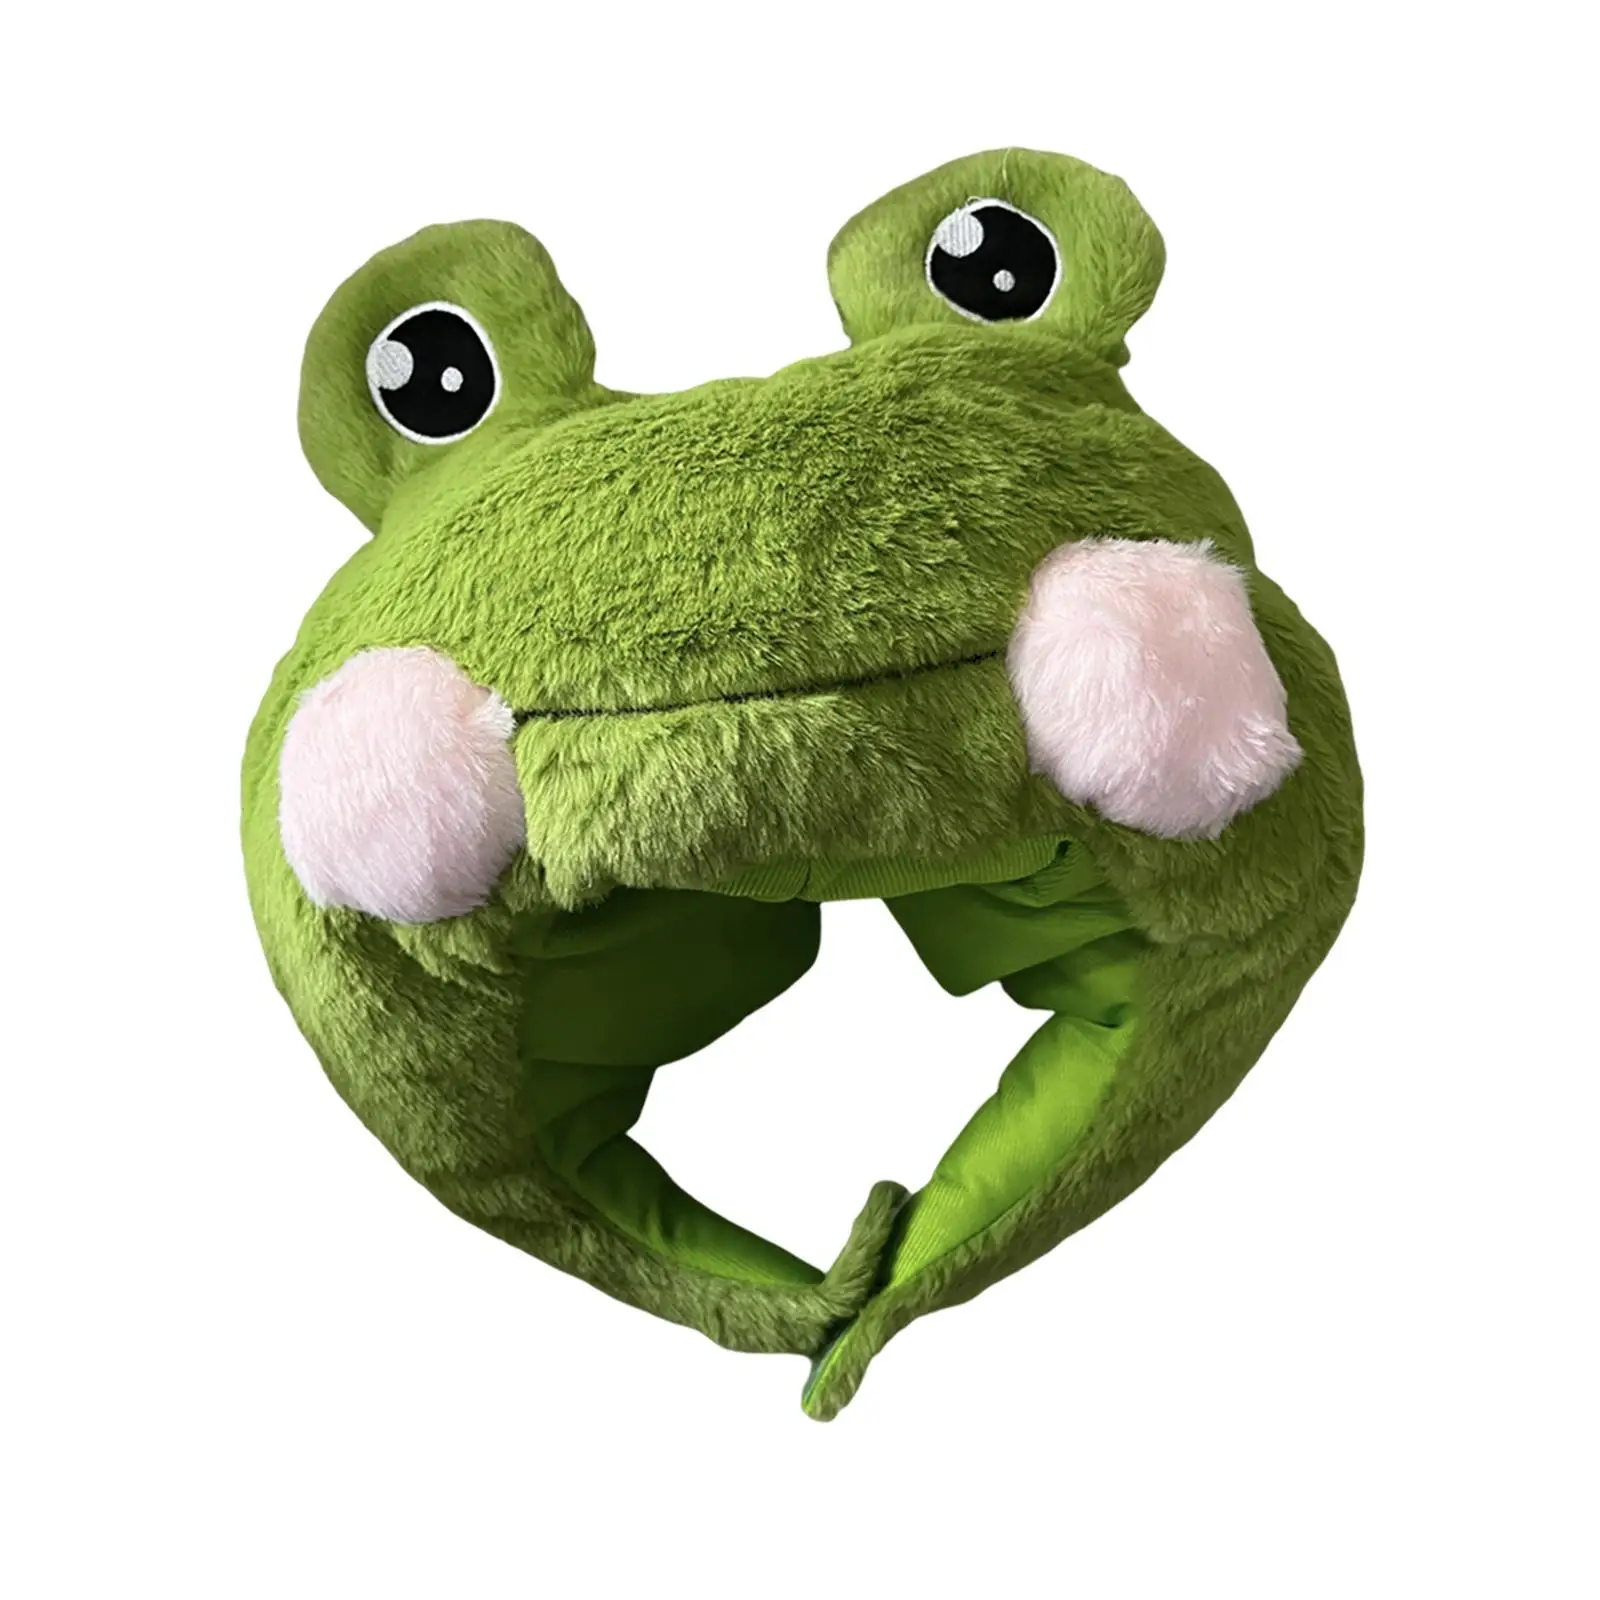 Lovely Frog Shaped Hat Costume Accessory Hats Headgear Stuffed Toy Cosplay Headwear Photo Prop for Adults Kids